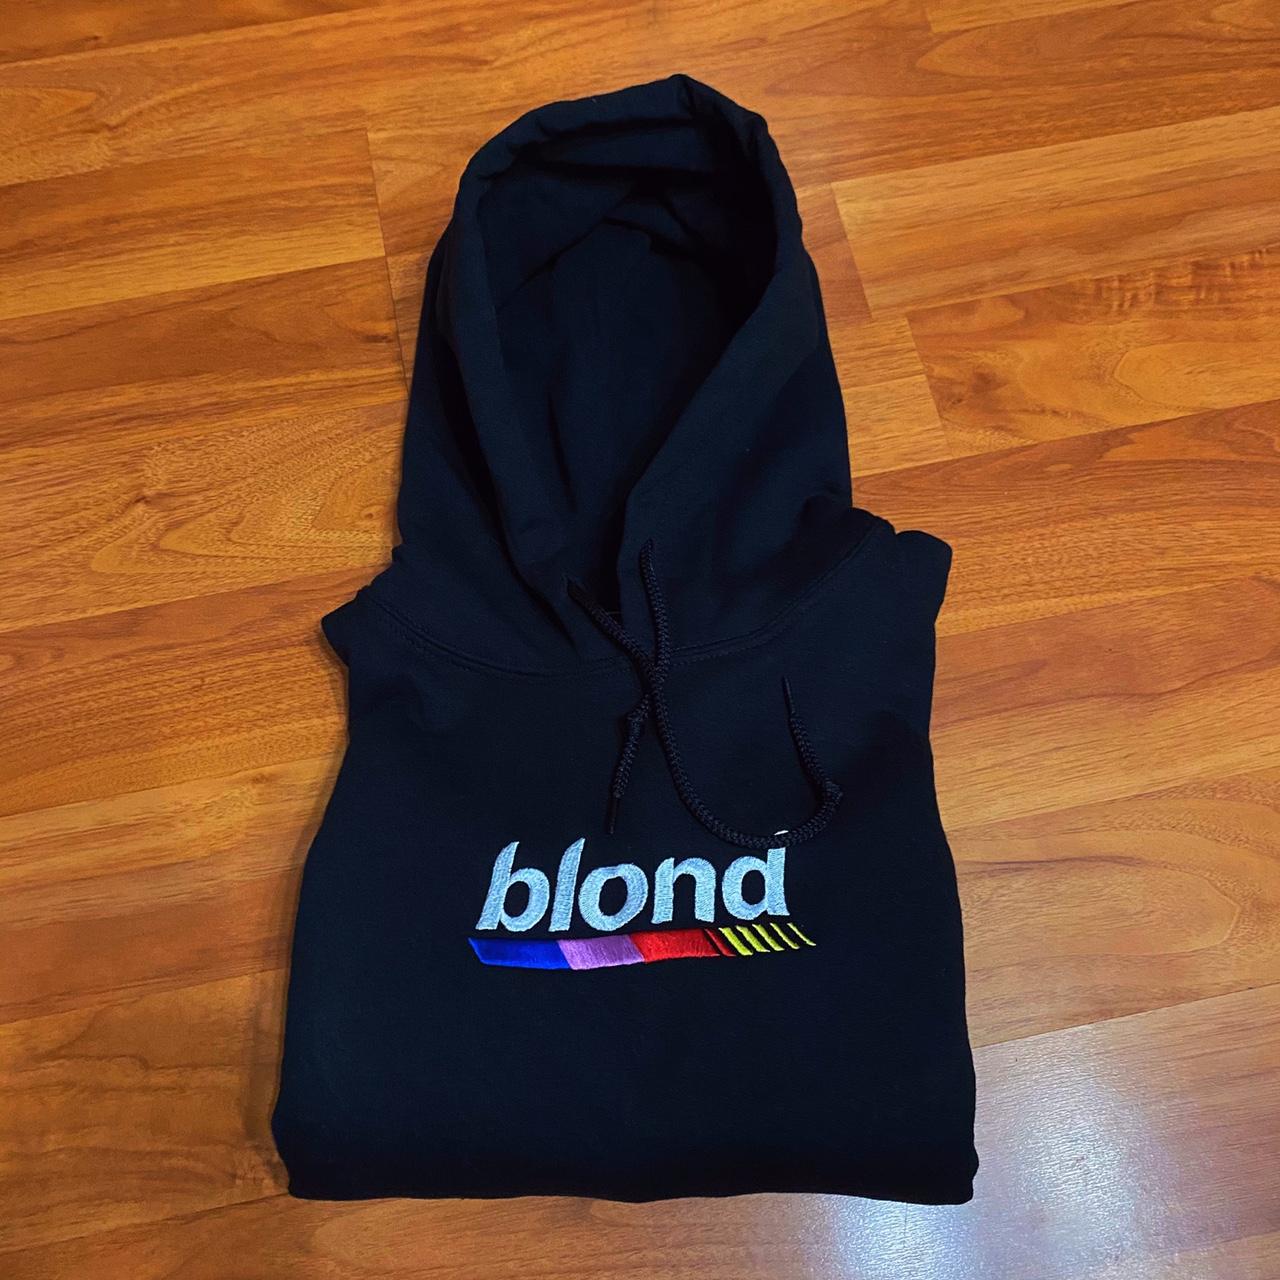 Frank Ocean All sizes Blonded embroidered hoodie